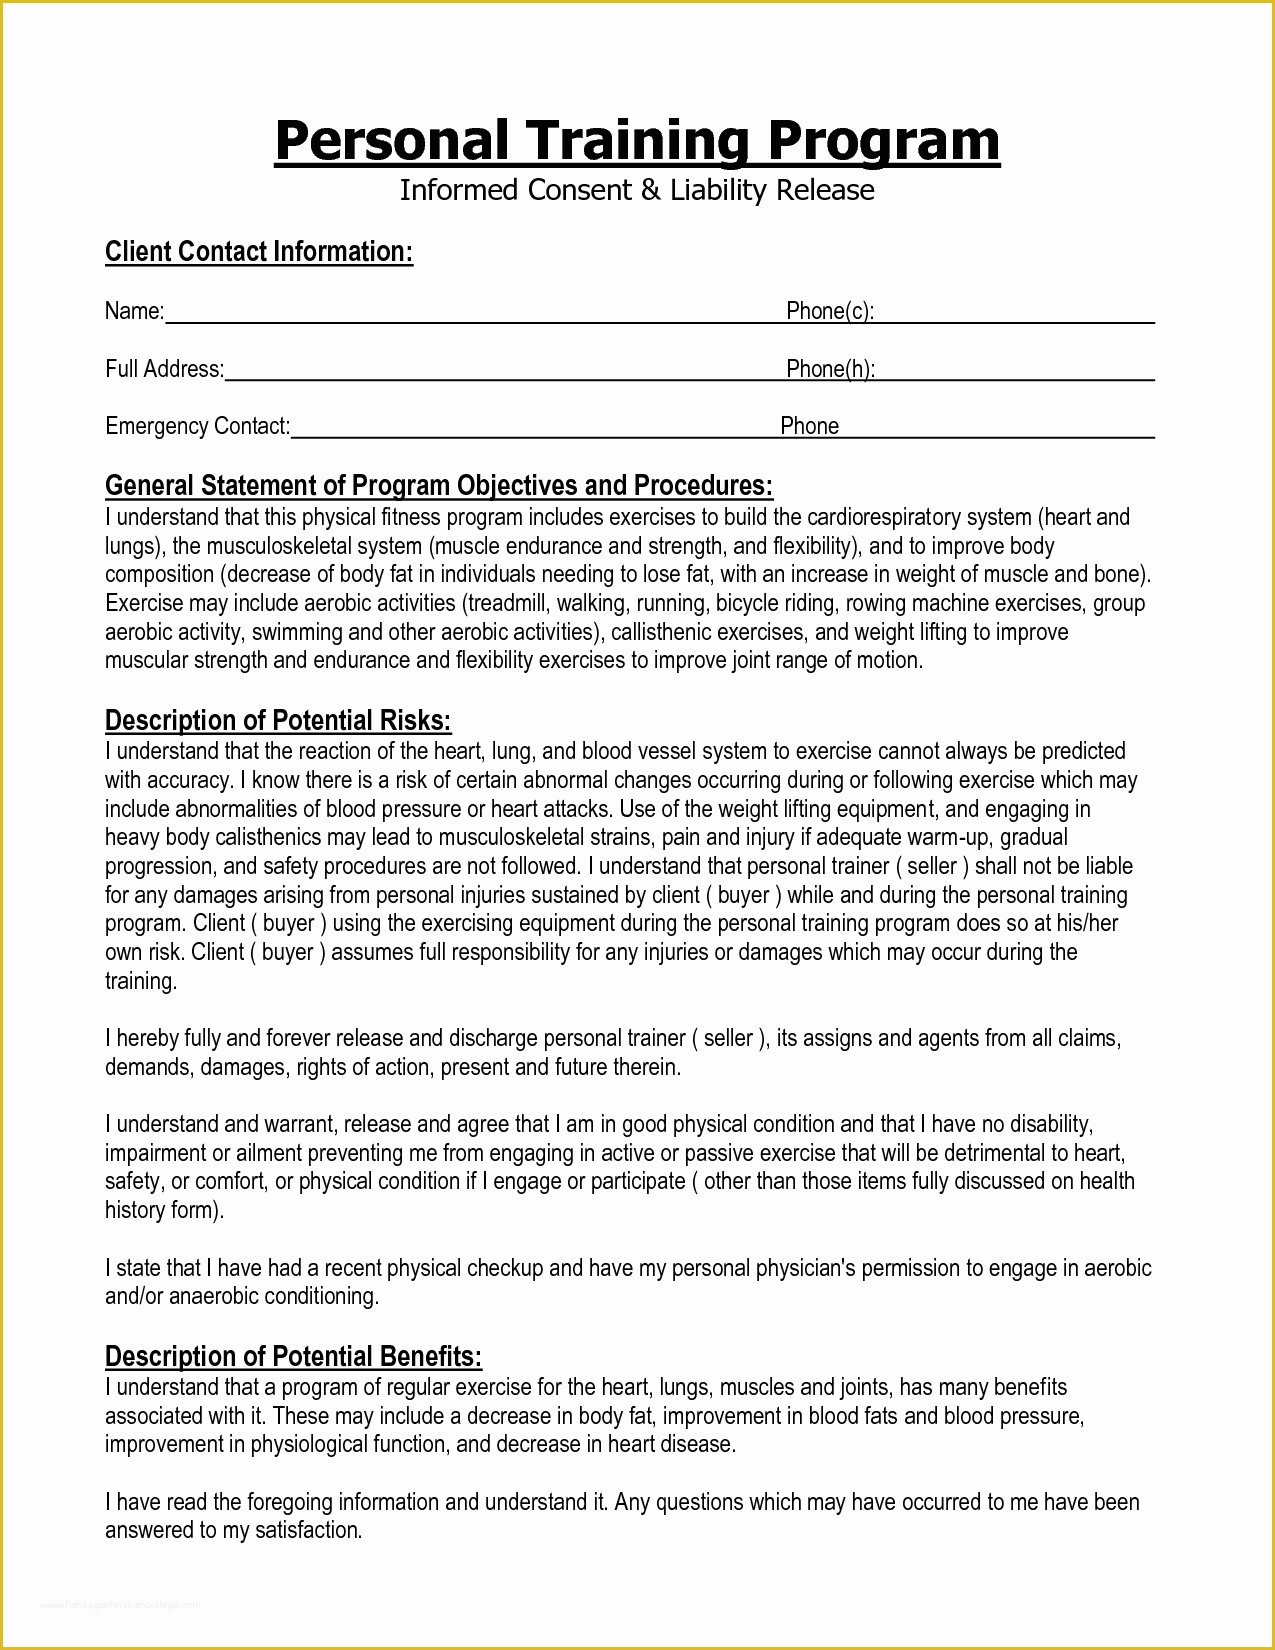 Free Dog Training Contract Template Of Informed Consent form Personal Training Google Search